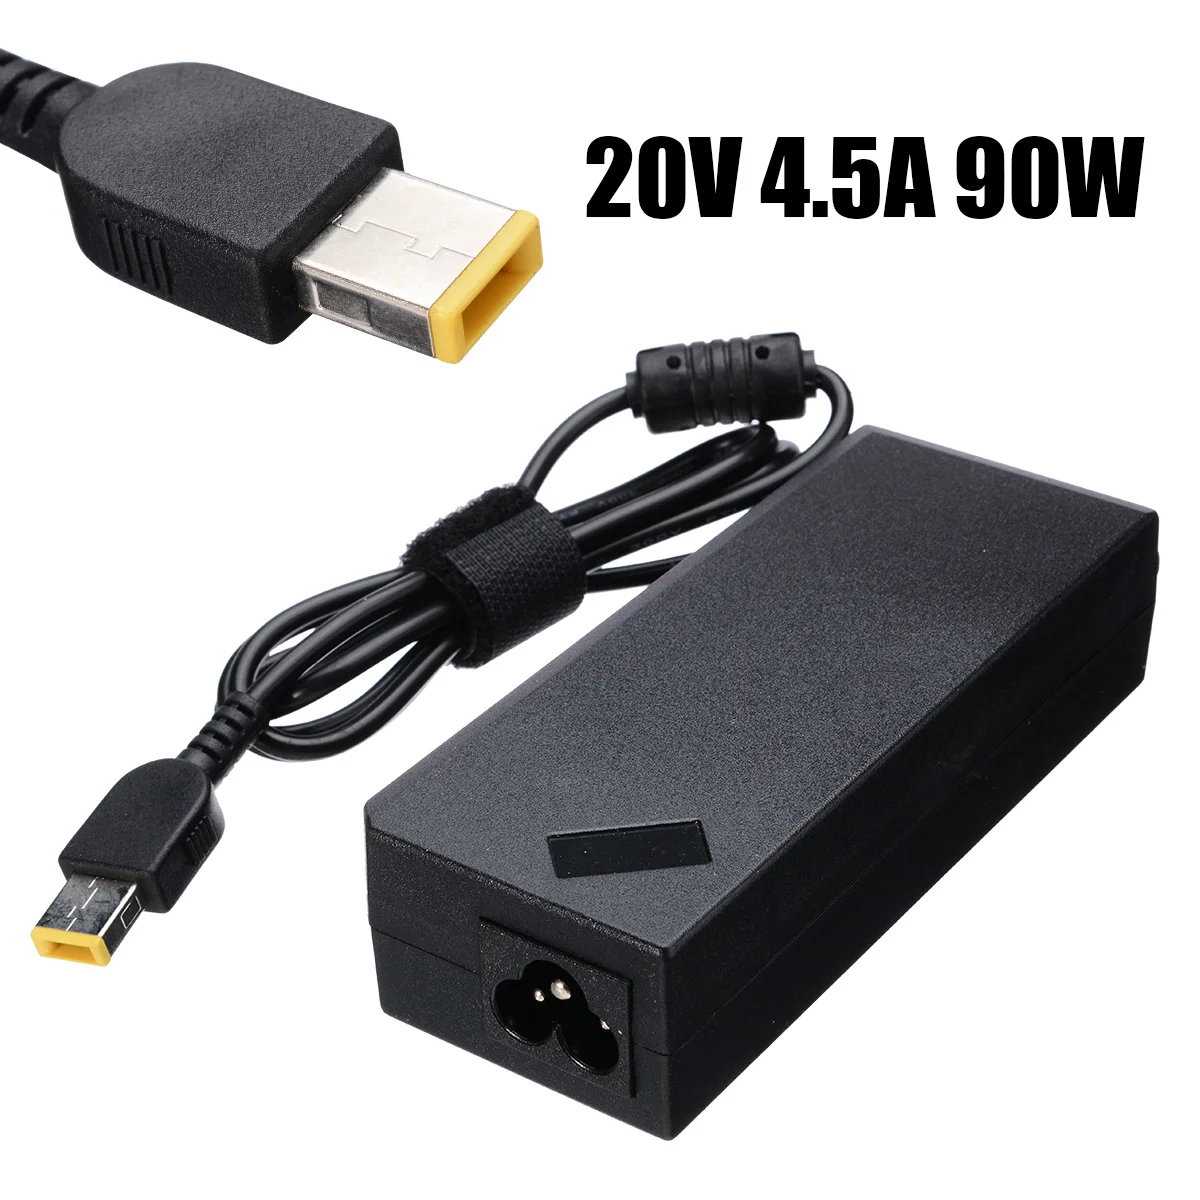 

Pohiks 1pc AC100-240V Adapter Charger High Quality 20V 4.5A 90W Notebook Power Supply Adapters For L-enovo ThinkPad